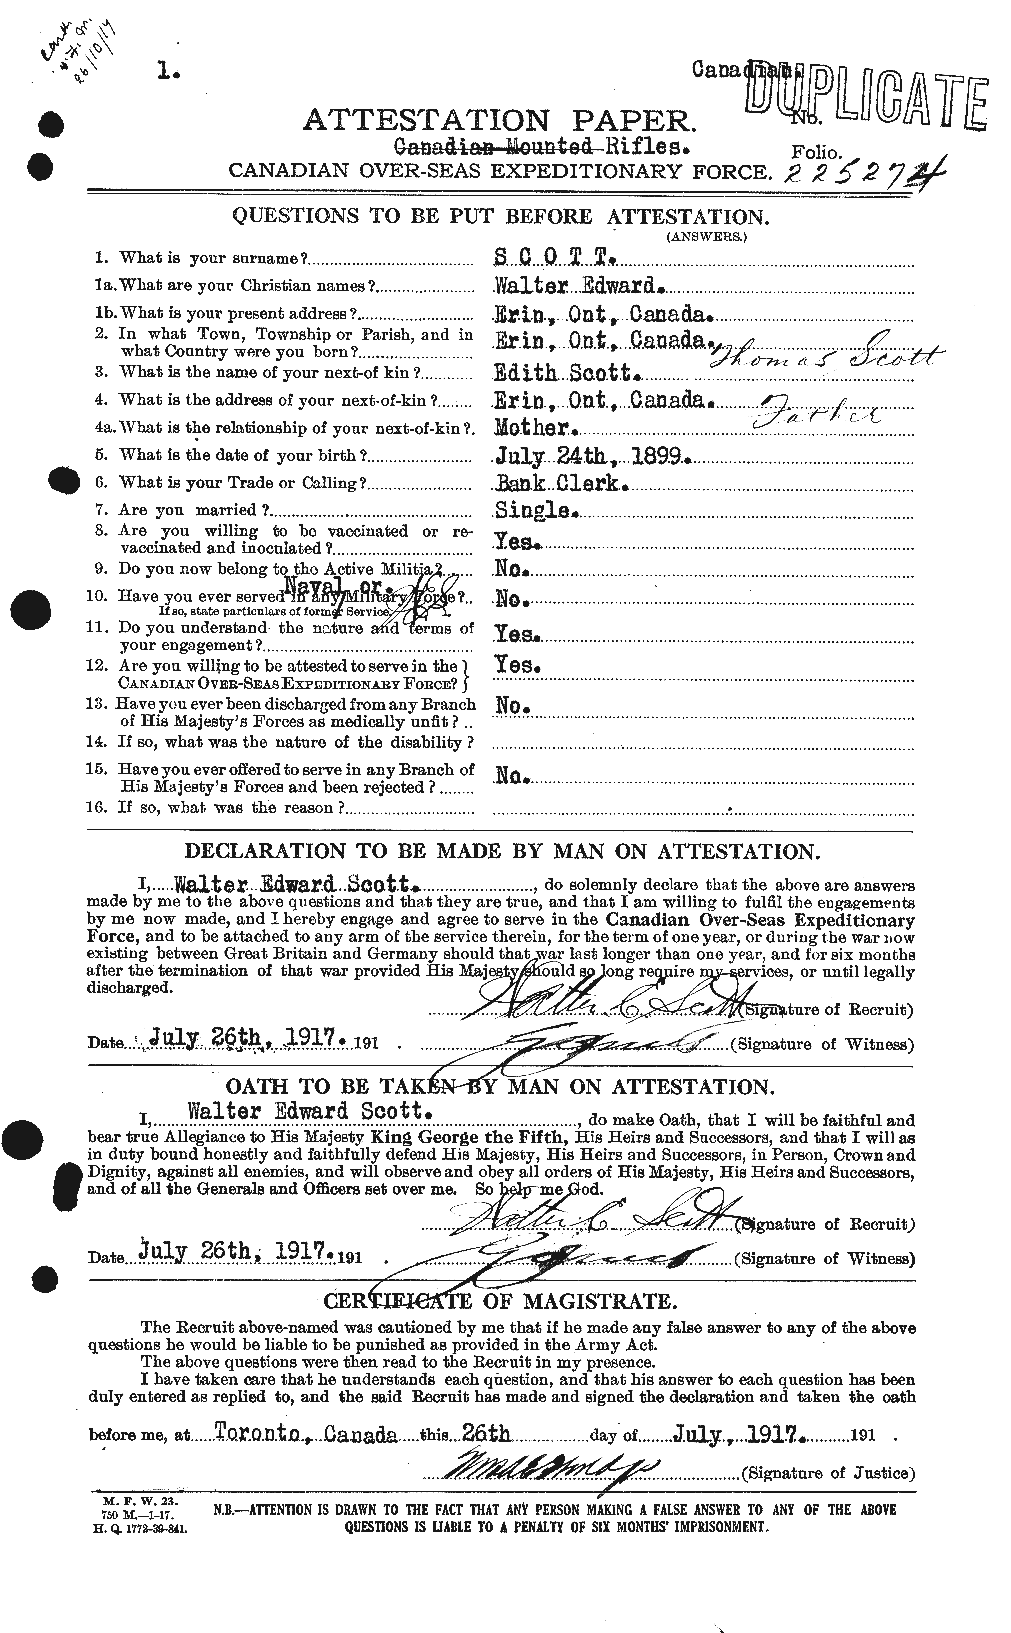 Personnel Records of the First World War - CEF 087994a